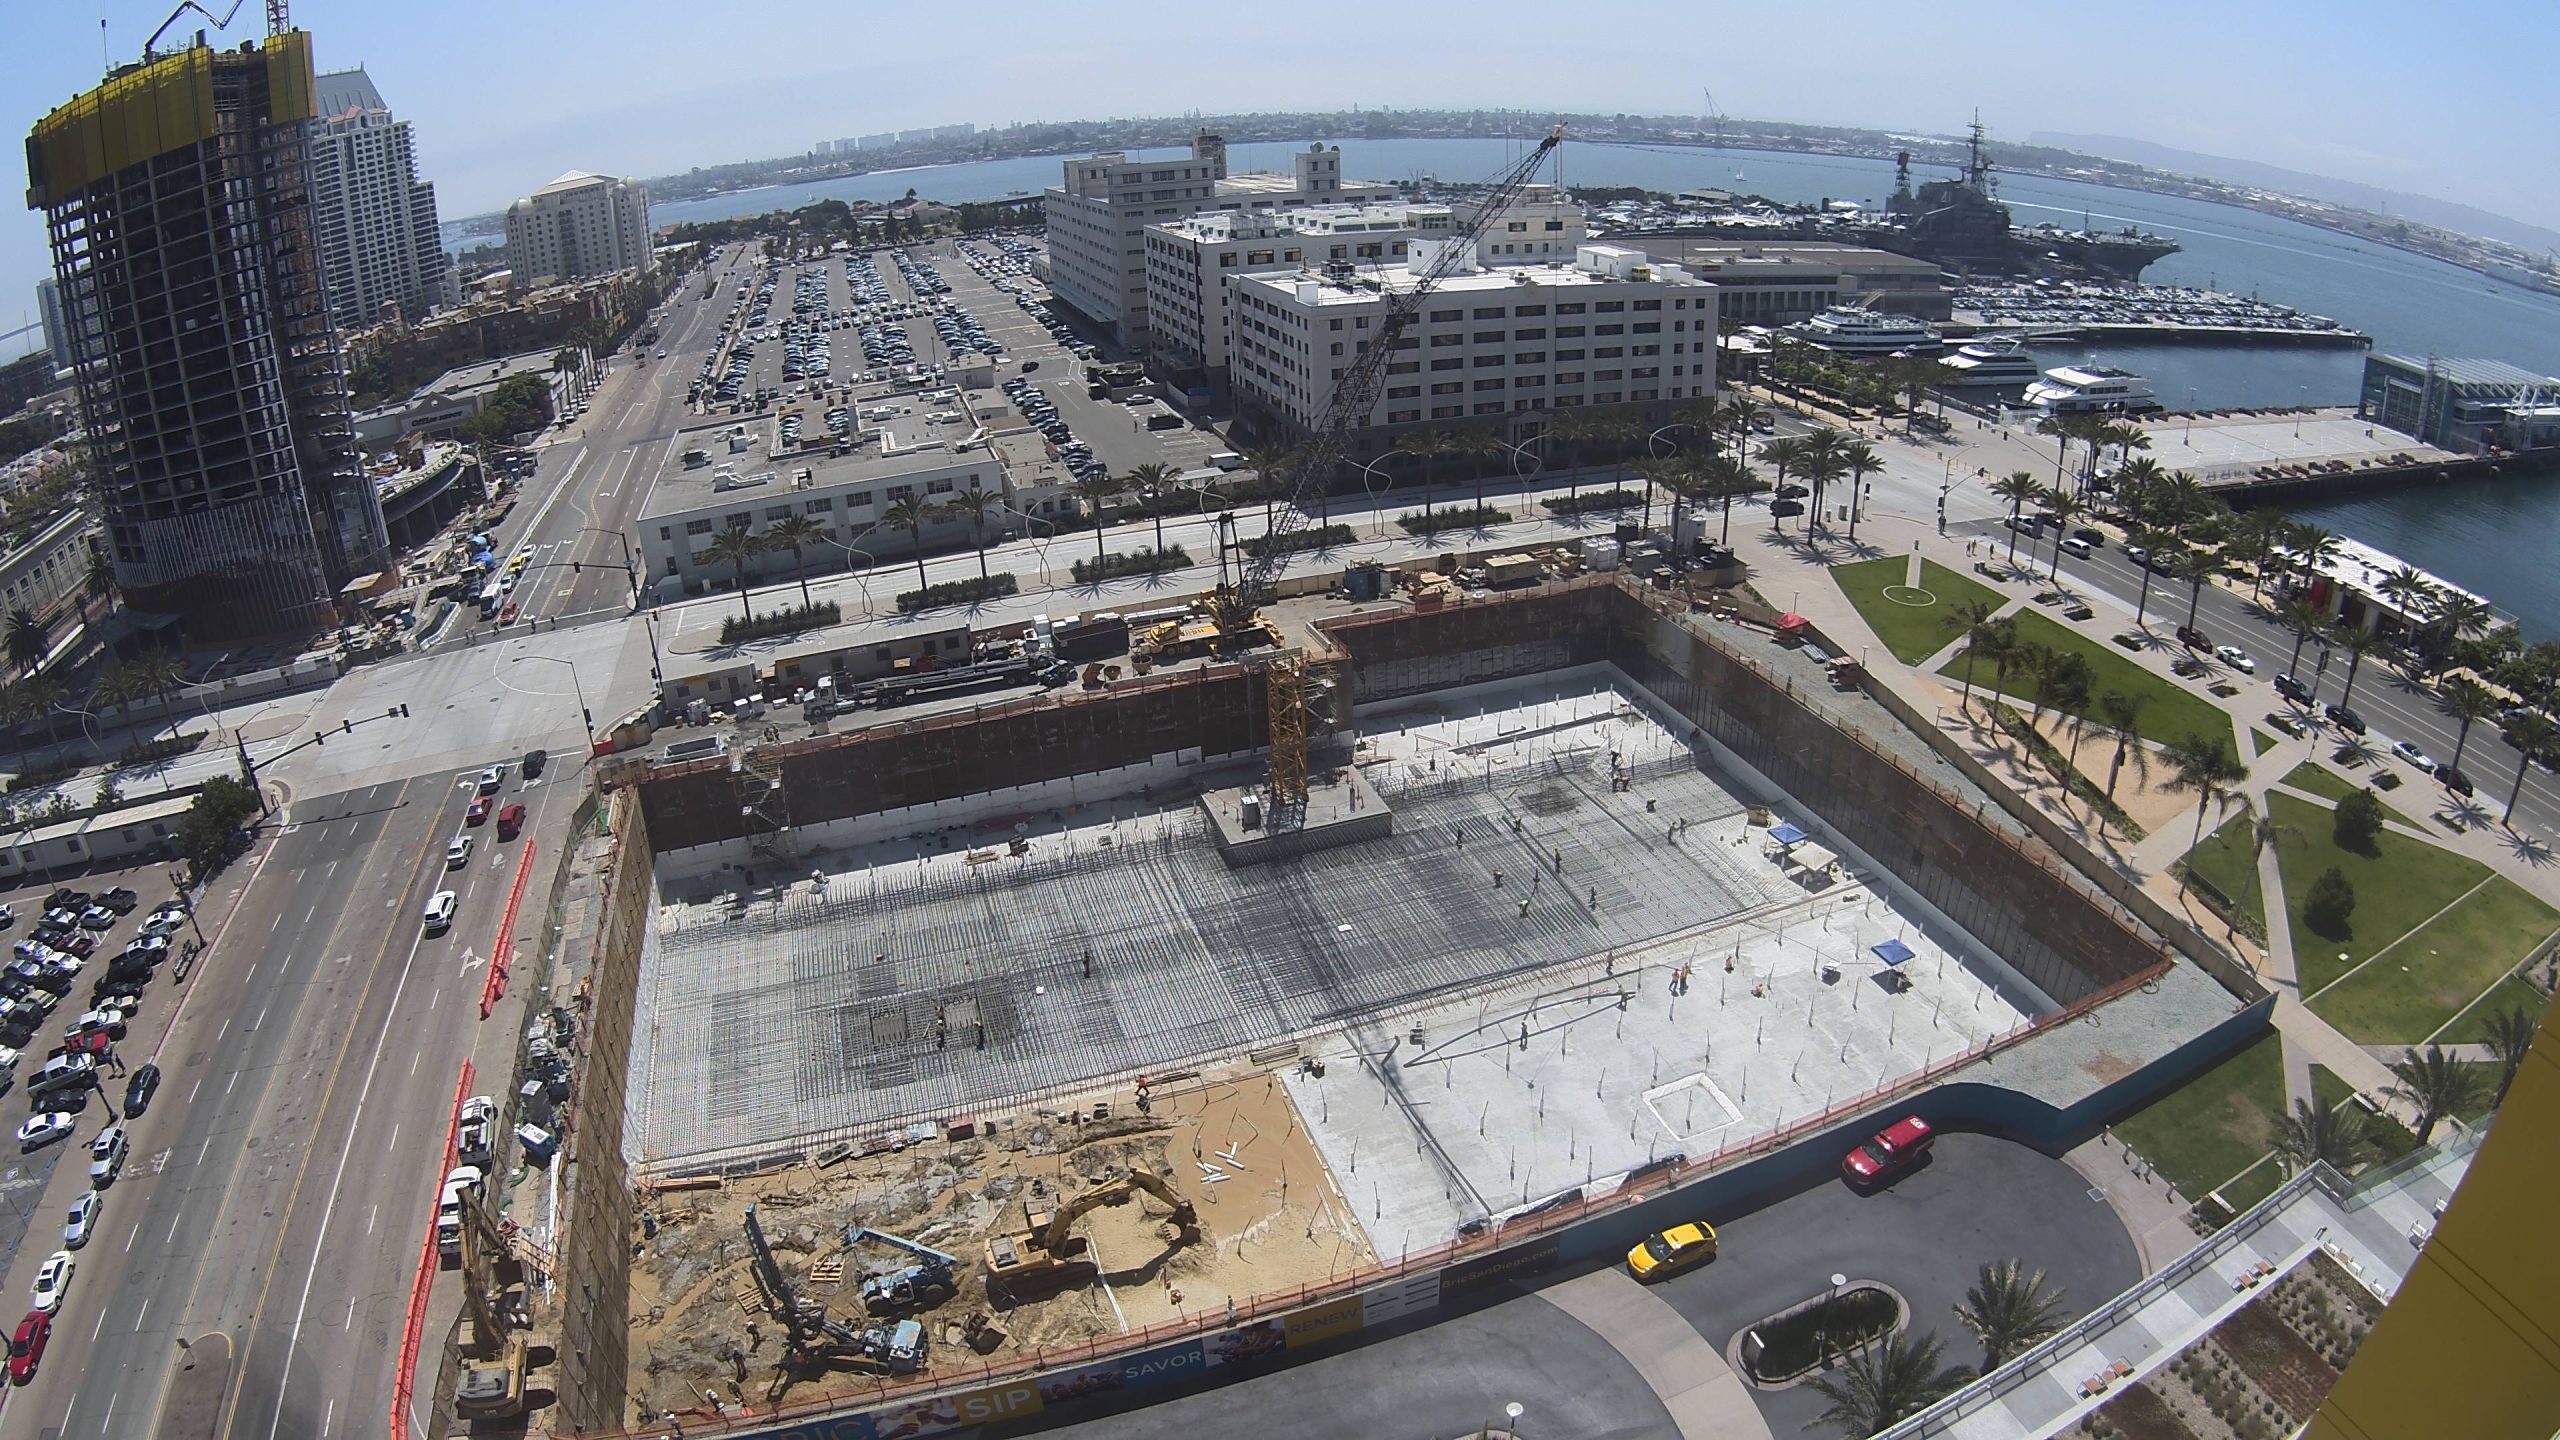 skyview of construction site where foundation has been laid